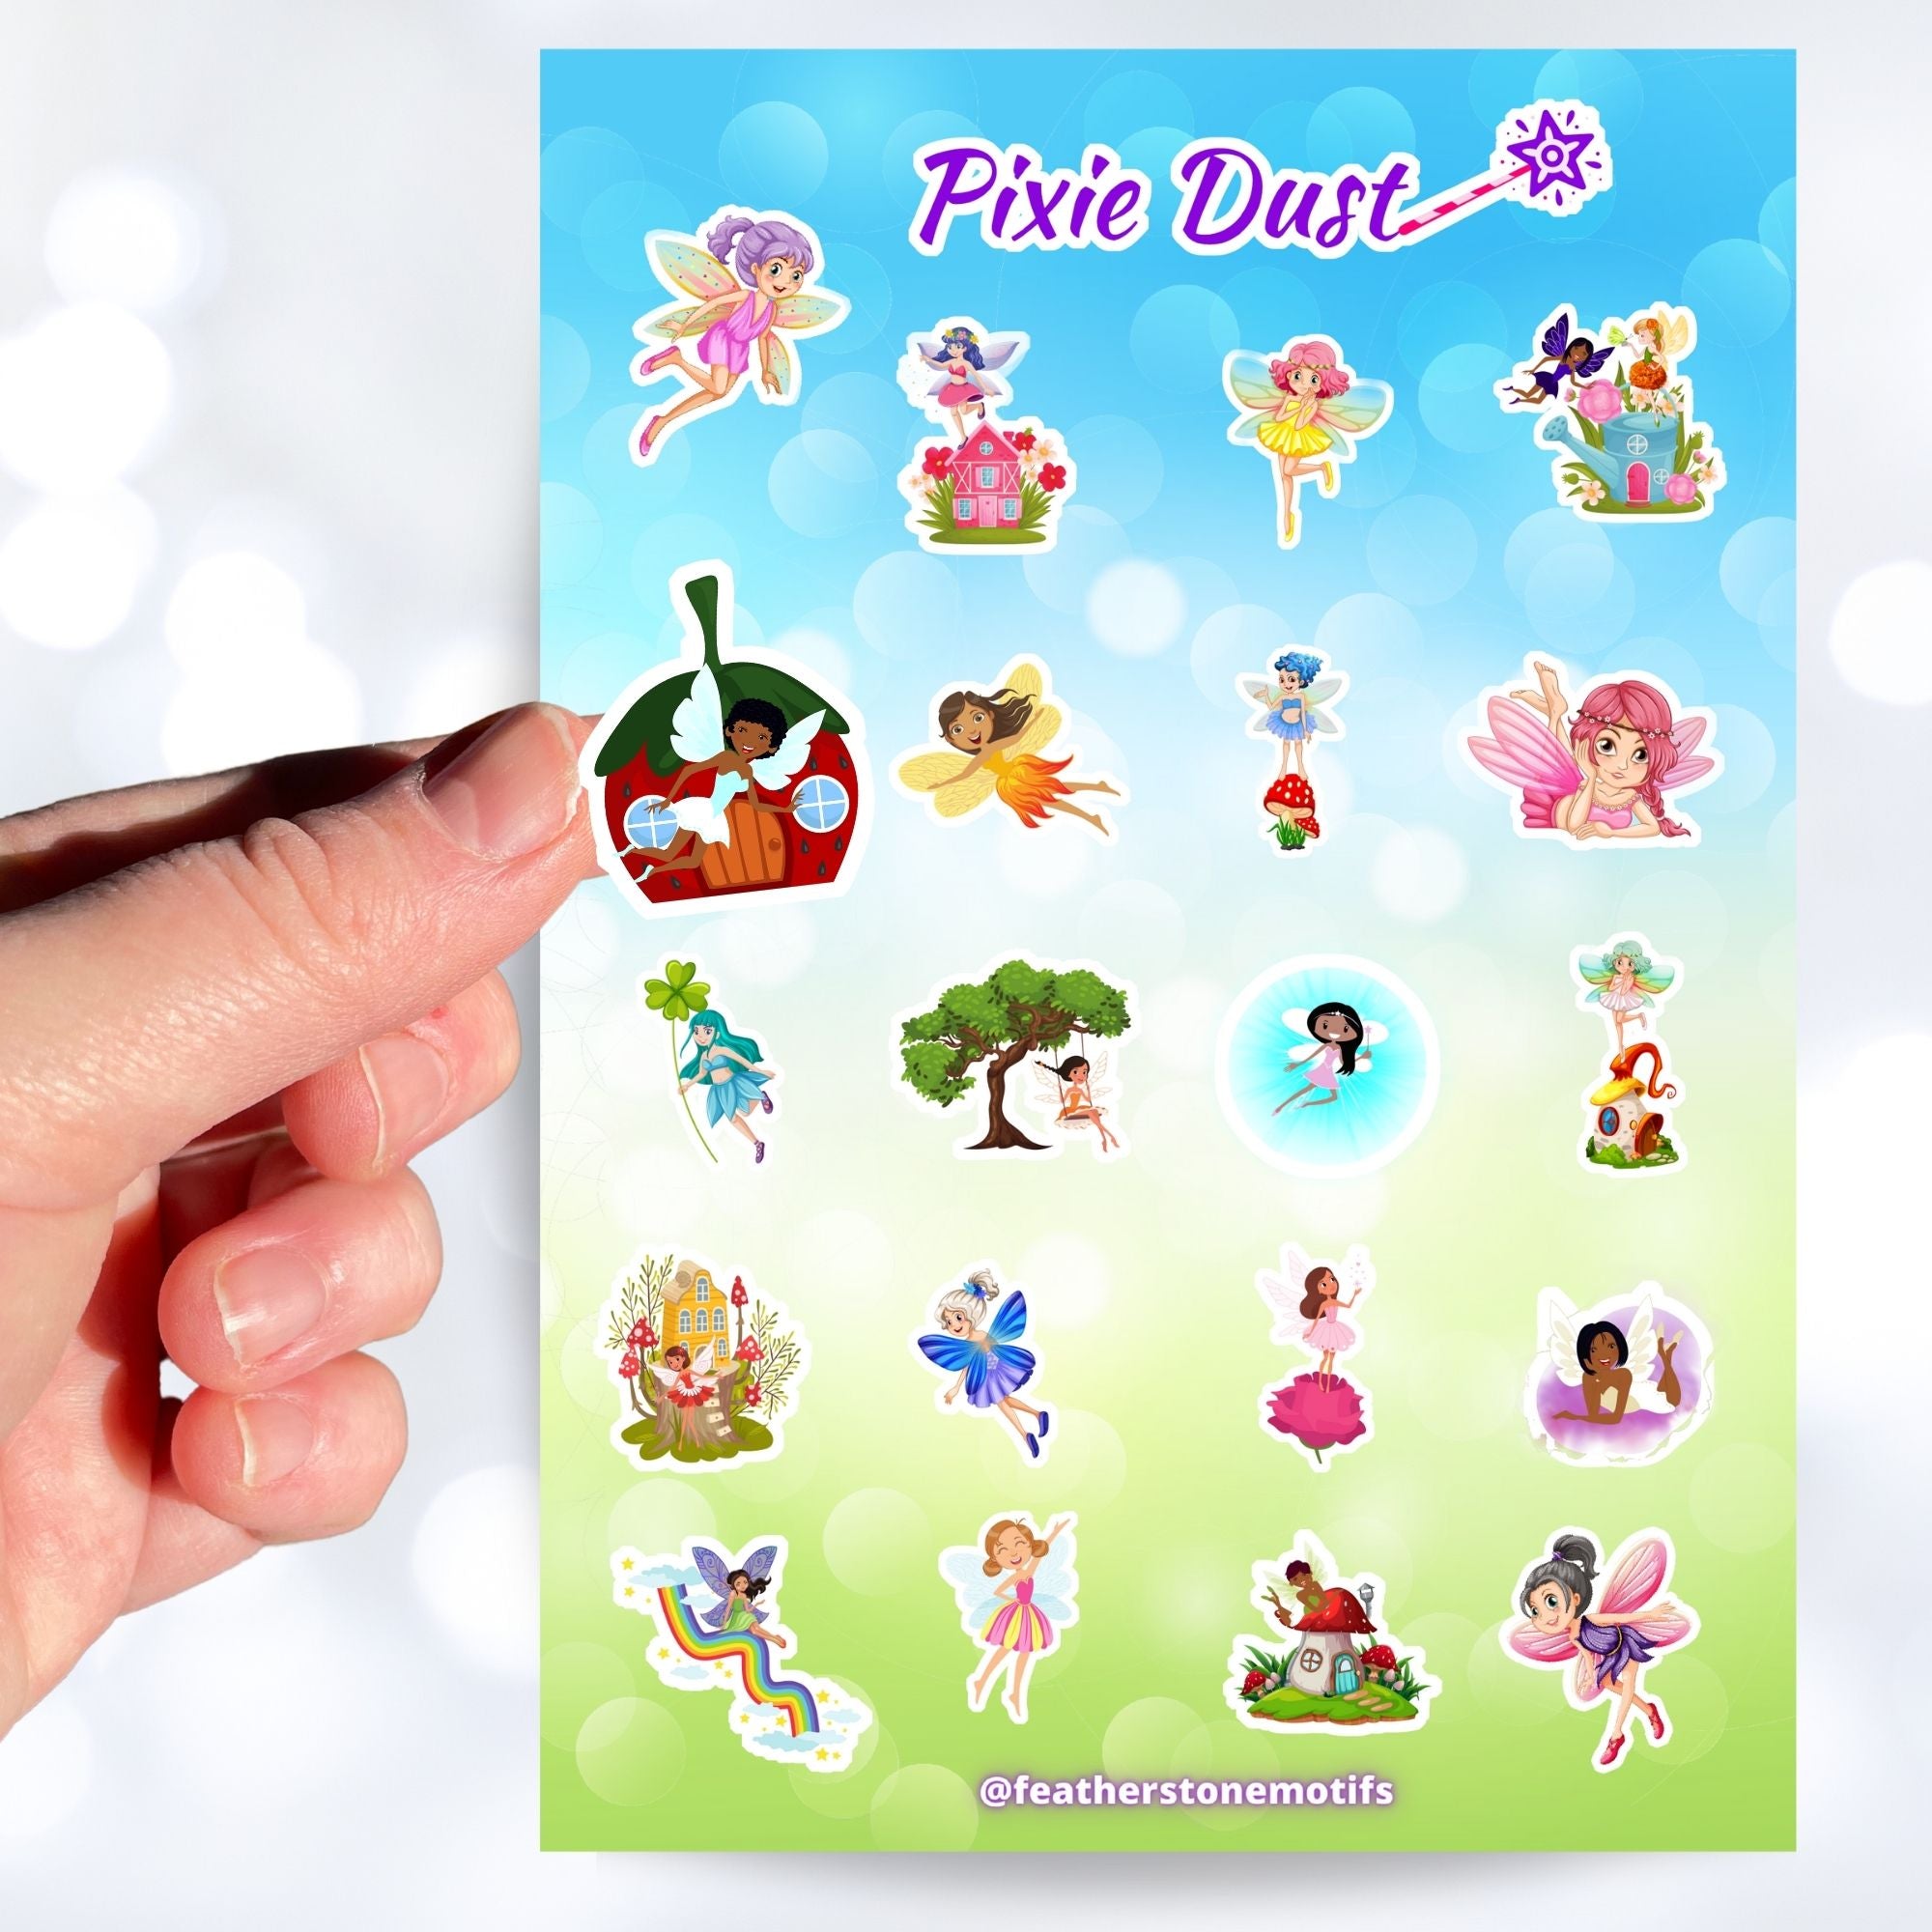 This sticker sheet has 20 different sticker images of fairies and it features a holographic sparkle overlay to give it that magical feel. This image shows a hand holding a sticker of a fairy in front of her acorn house above the sticker sheet.